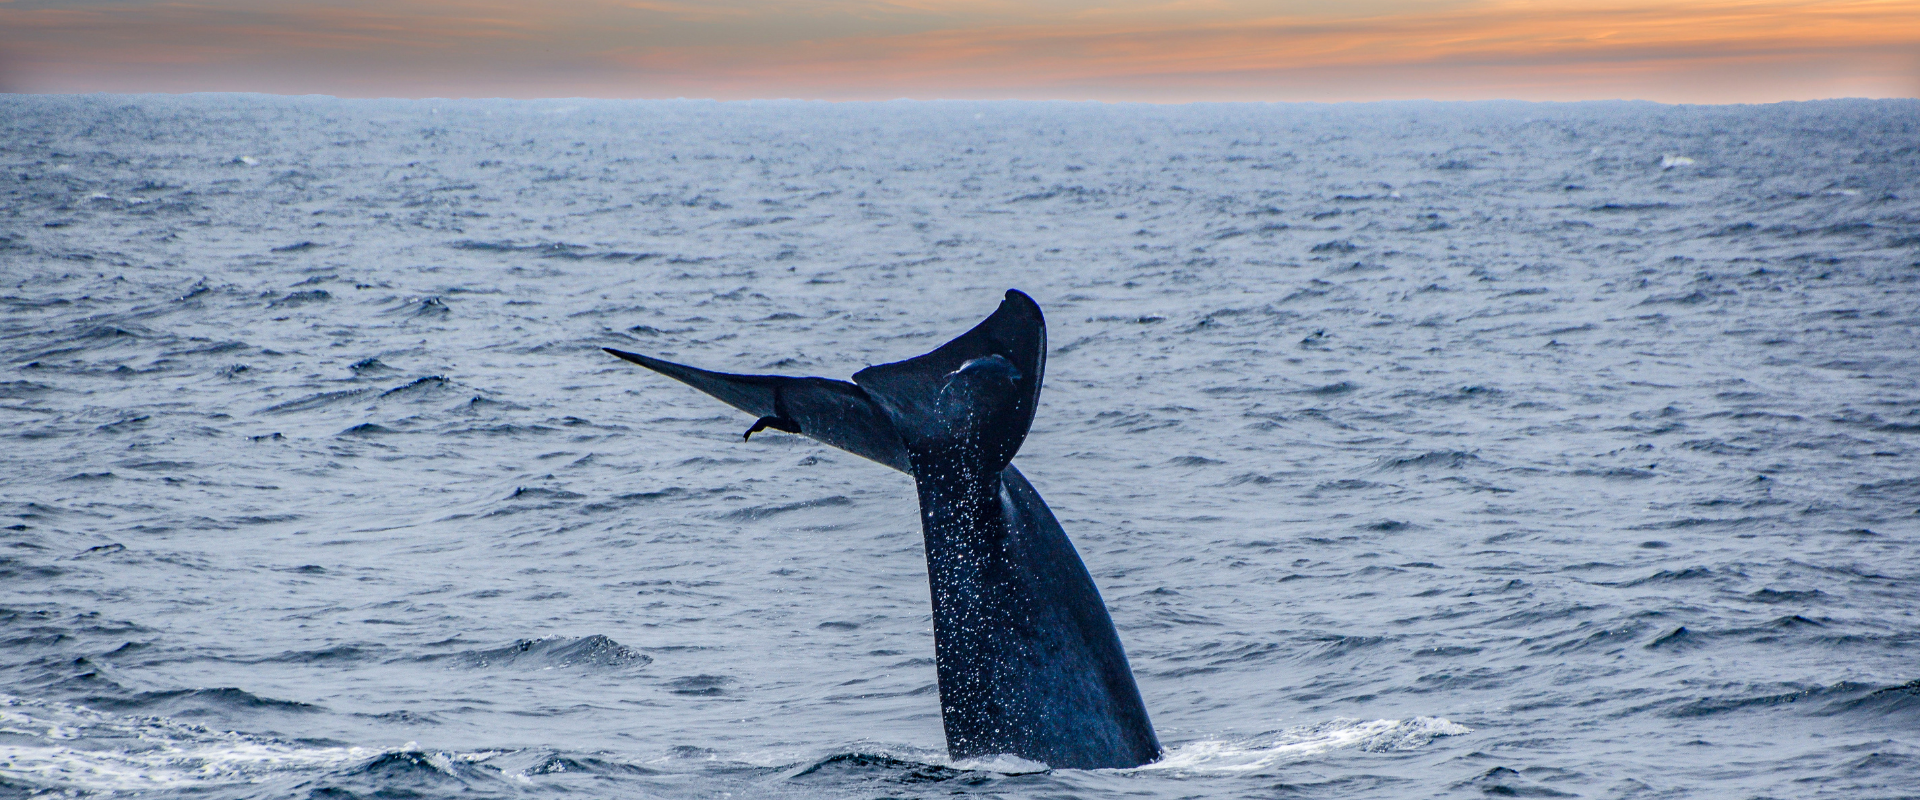 What to Expect on a Whale Watching Expedition